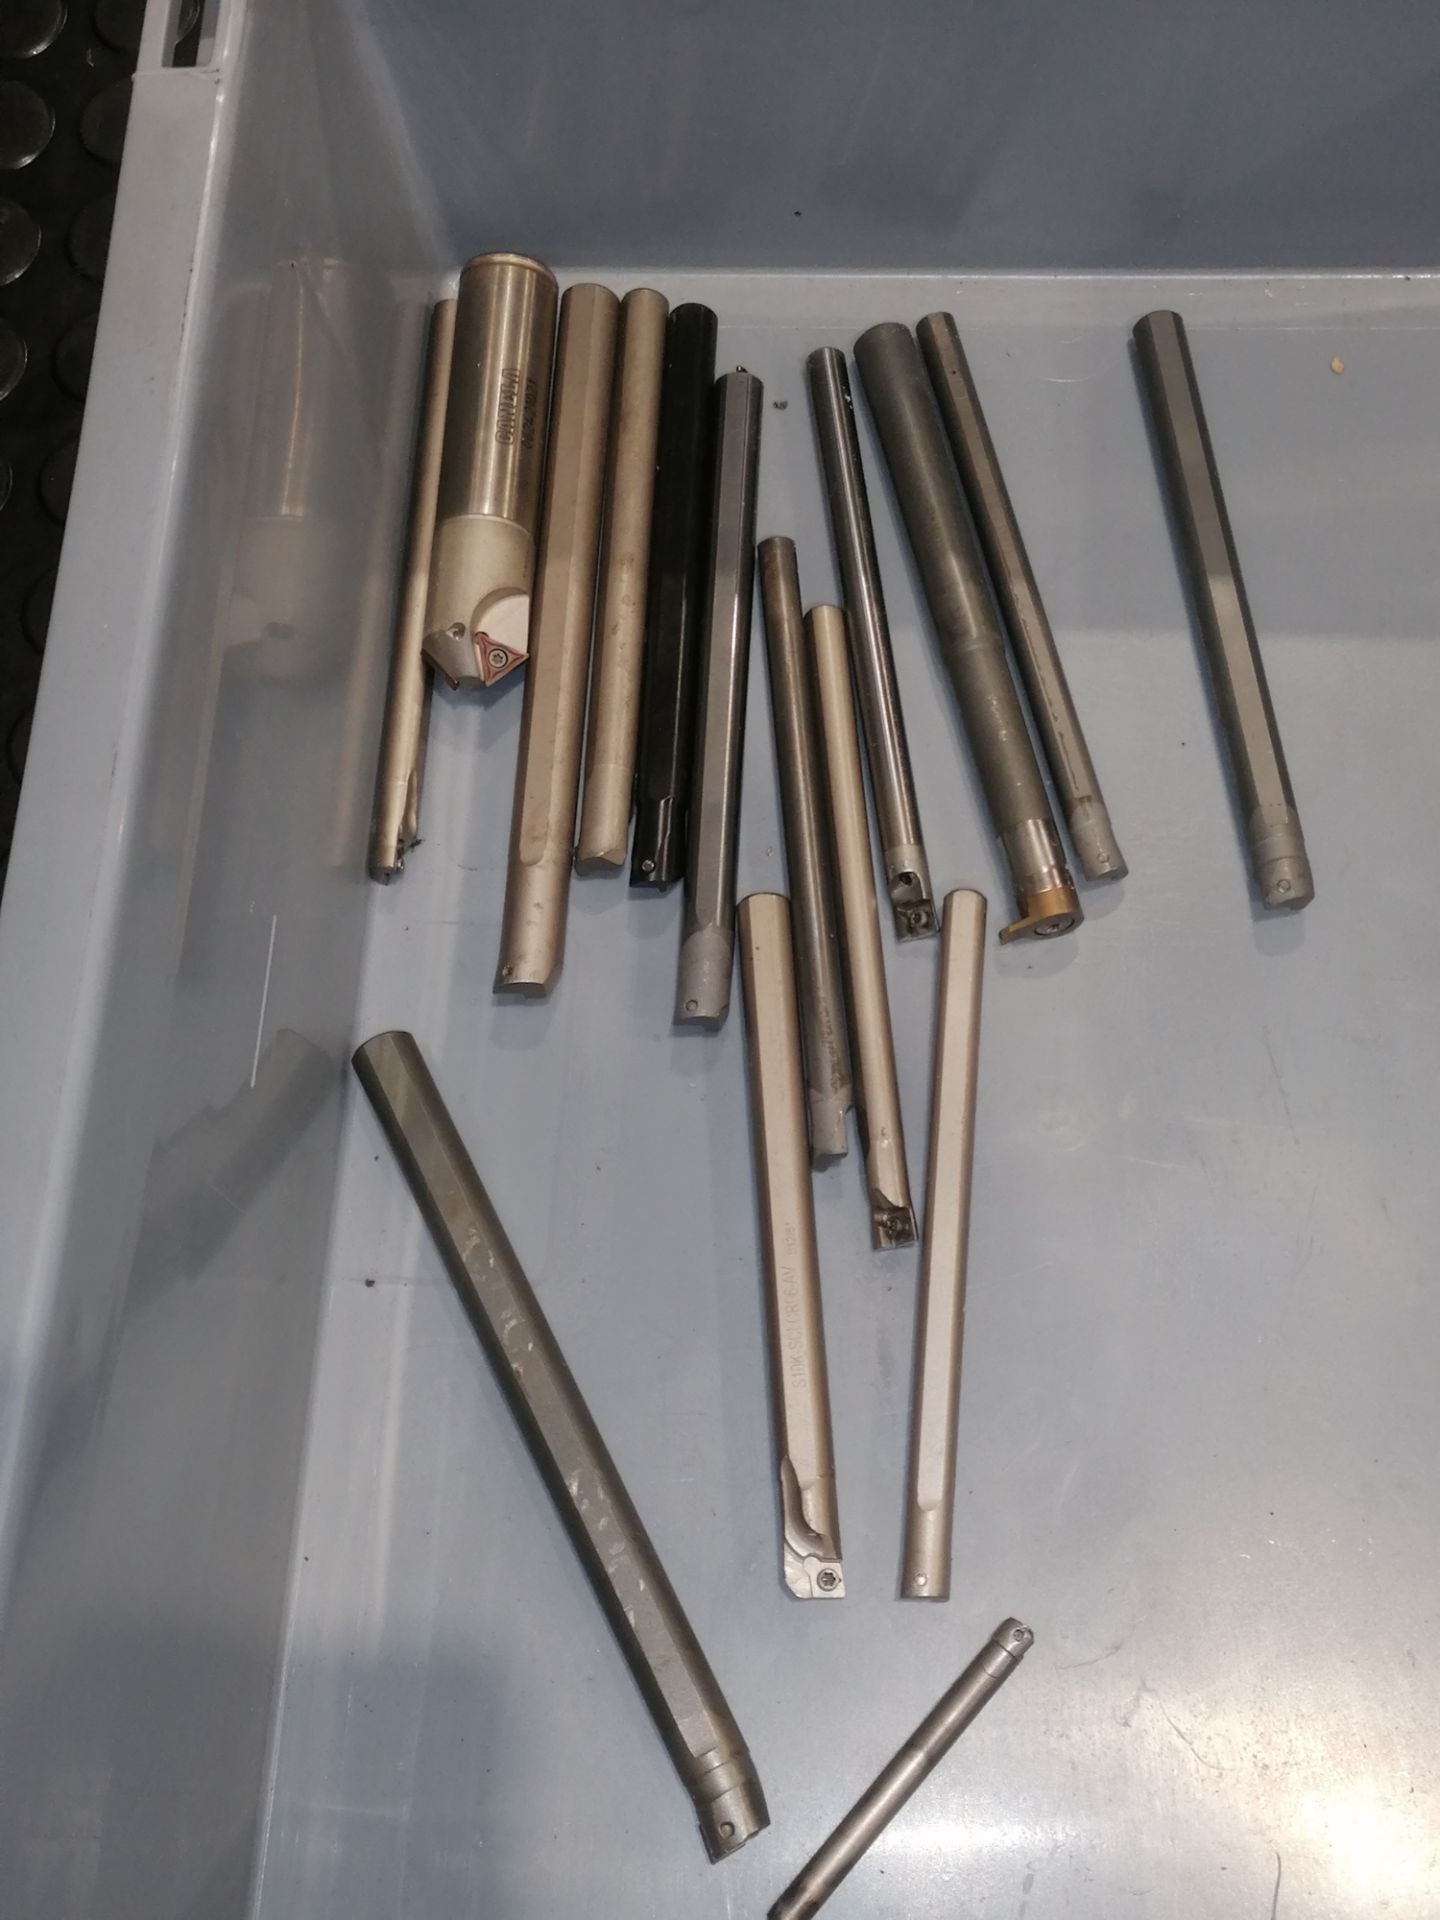 Carbide Boring Bars (Various Sizes) (Please Note: Plastic Container Boxes Are Not Included) - Image 2 of 6